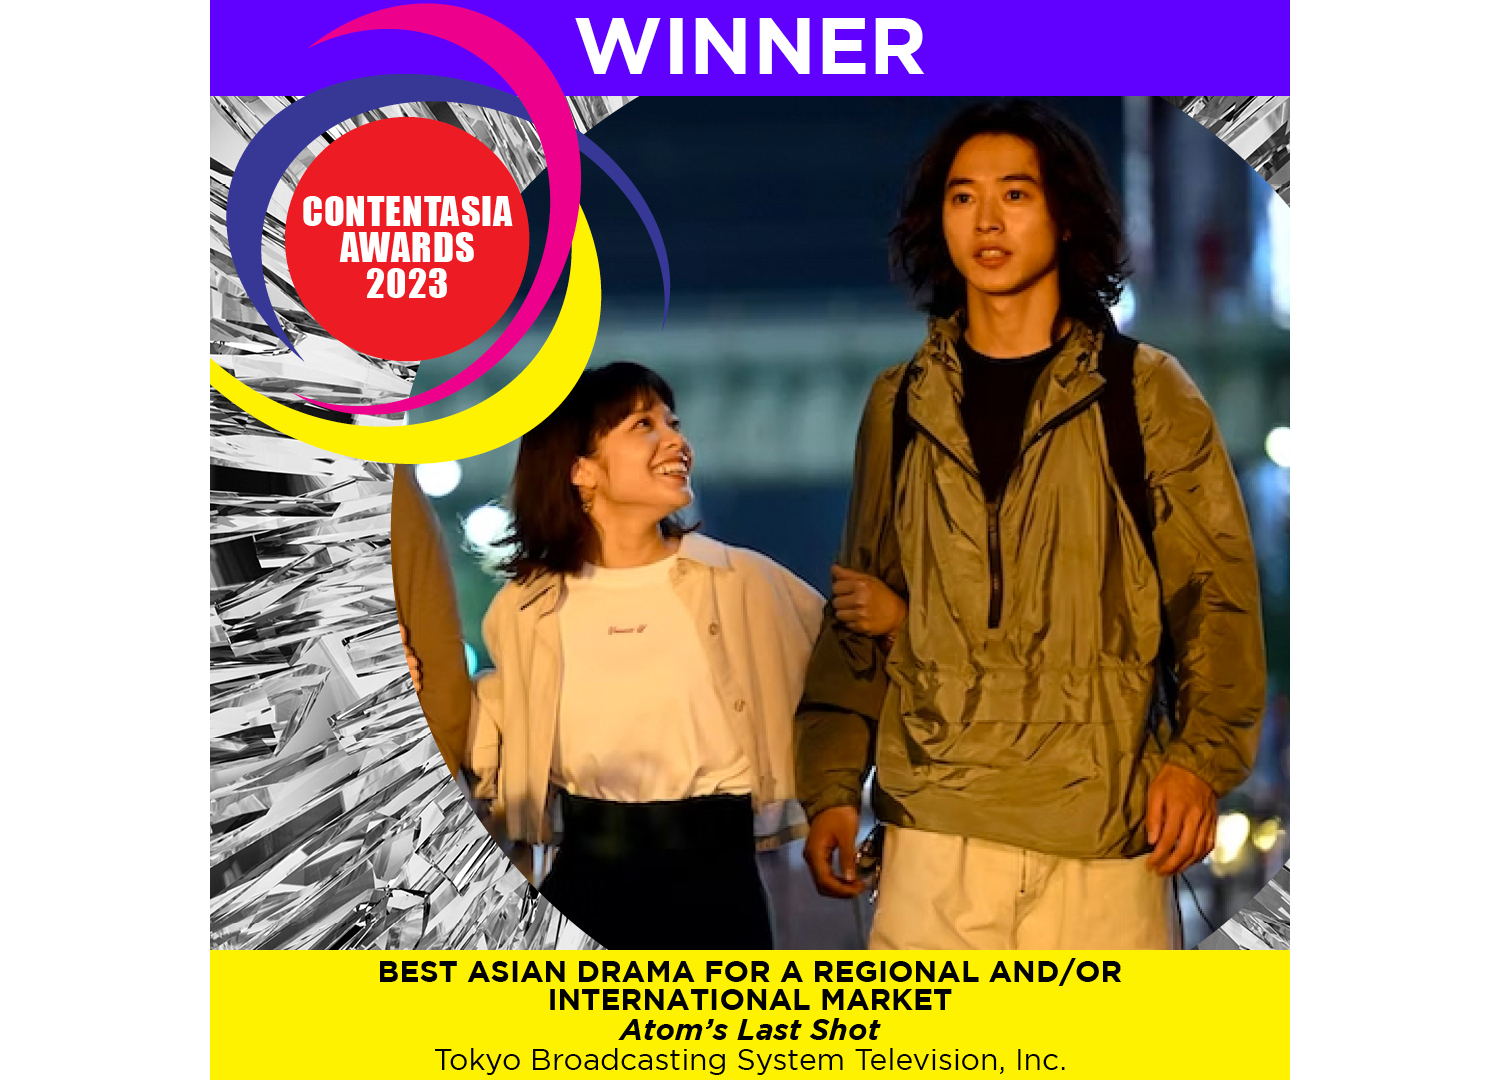 Best Asian Drama for a Regional and/or International Market